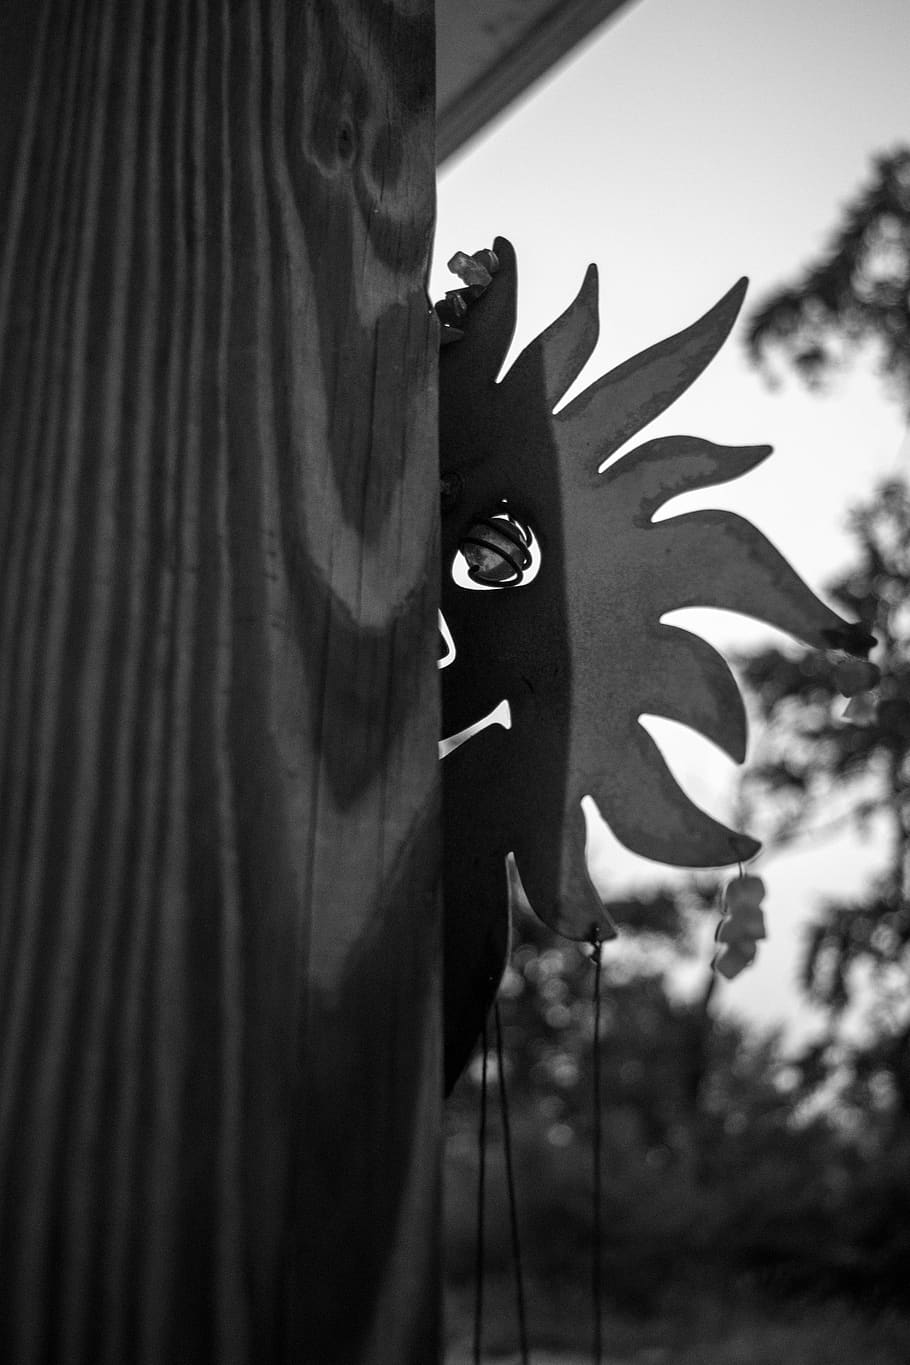 sun, black and white, wind chime, grayscale, creepy, dusk, plant, close-up, focus on foreground, nature